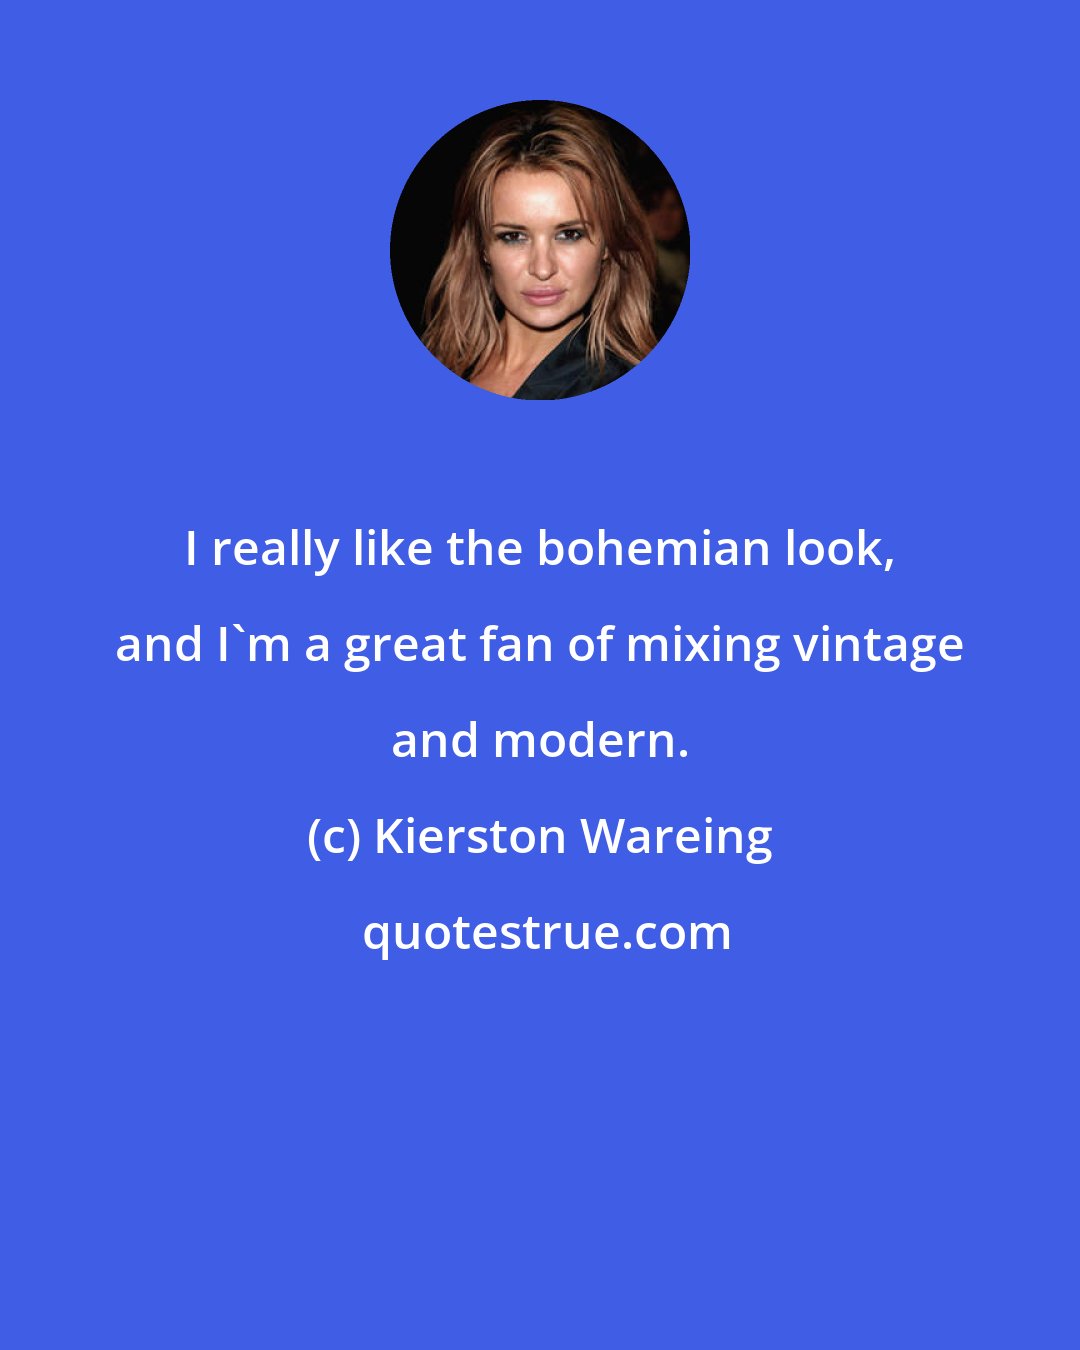 Kierston Wareing: I really like the bohemian look, and I'm a great fan of mixing vintage and modern.